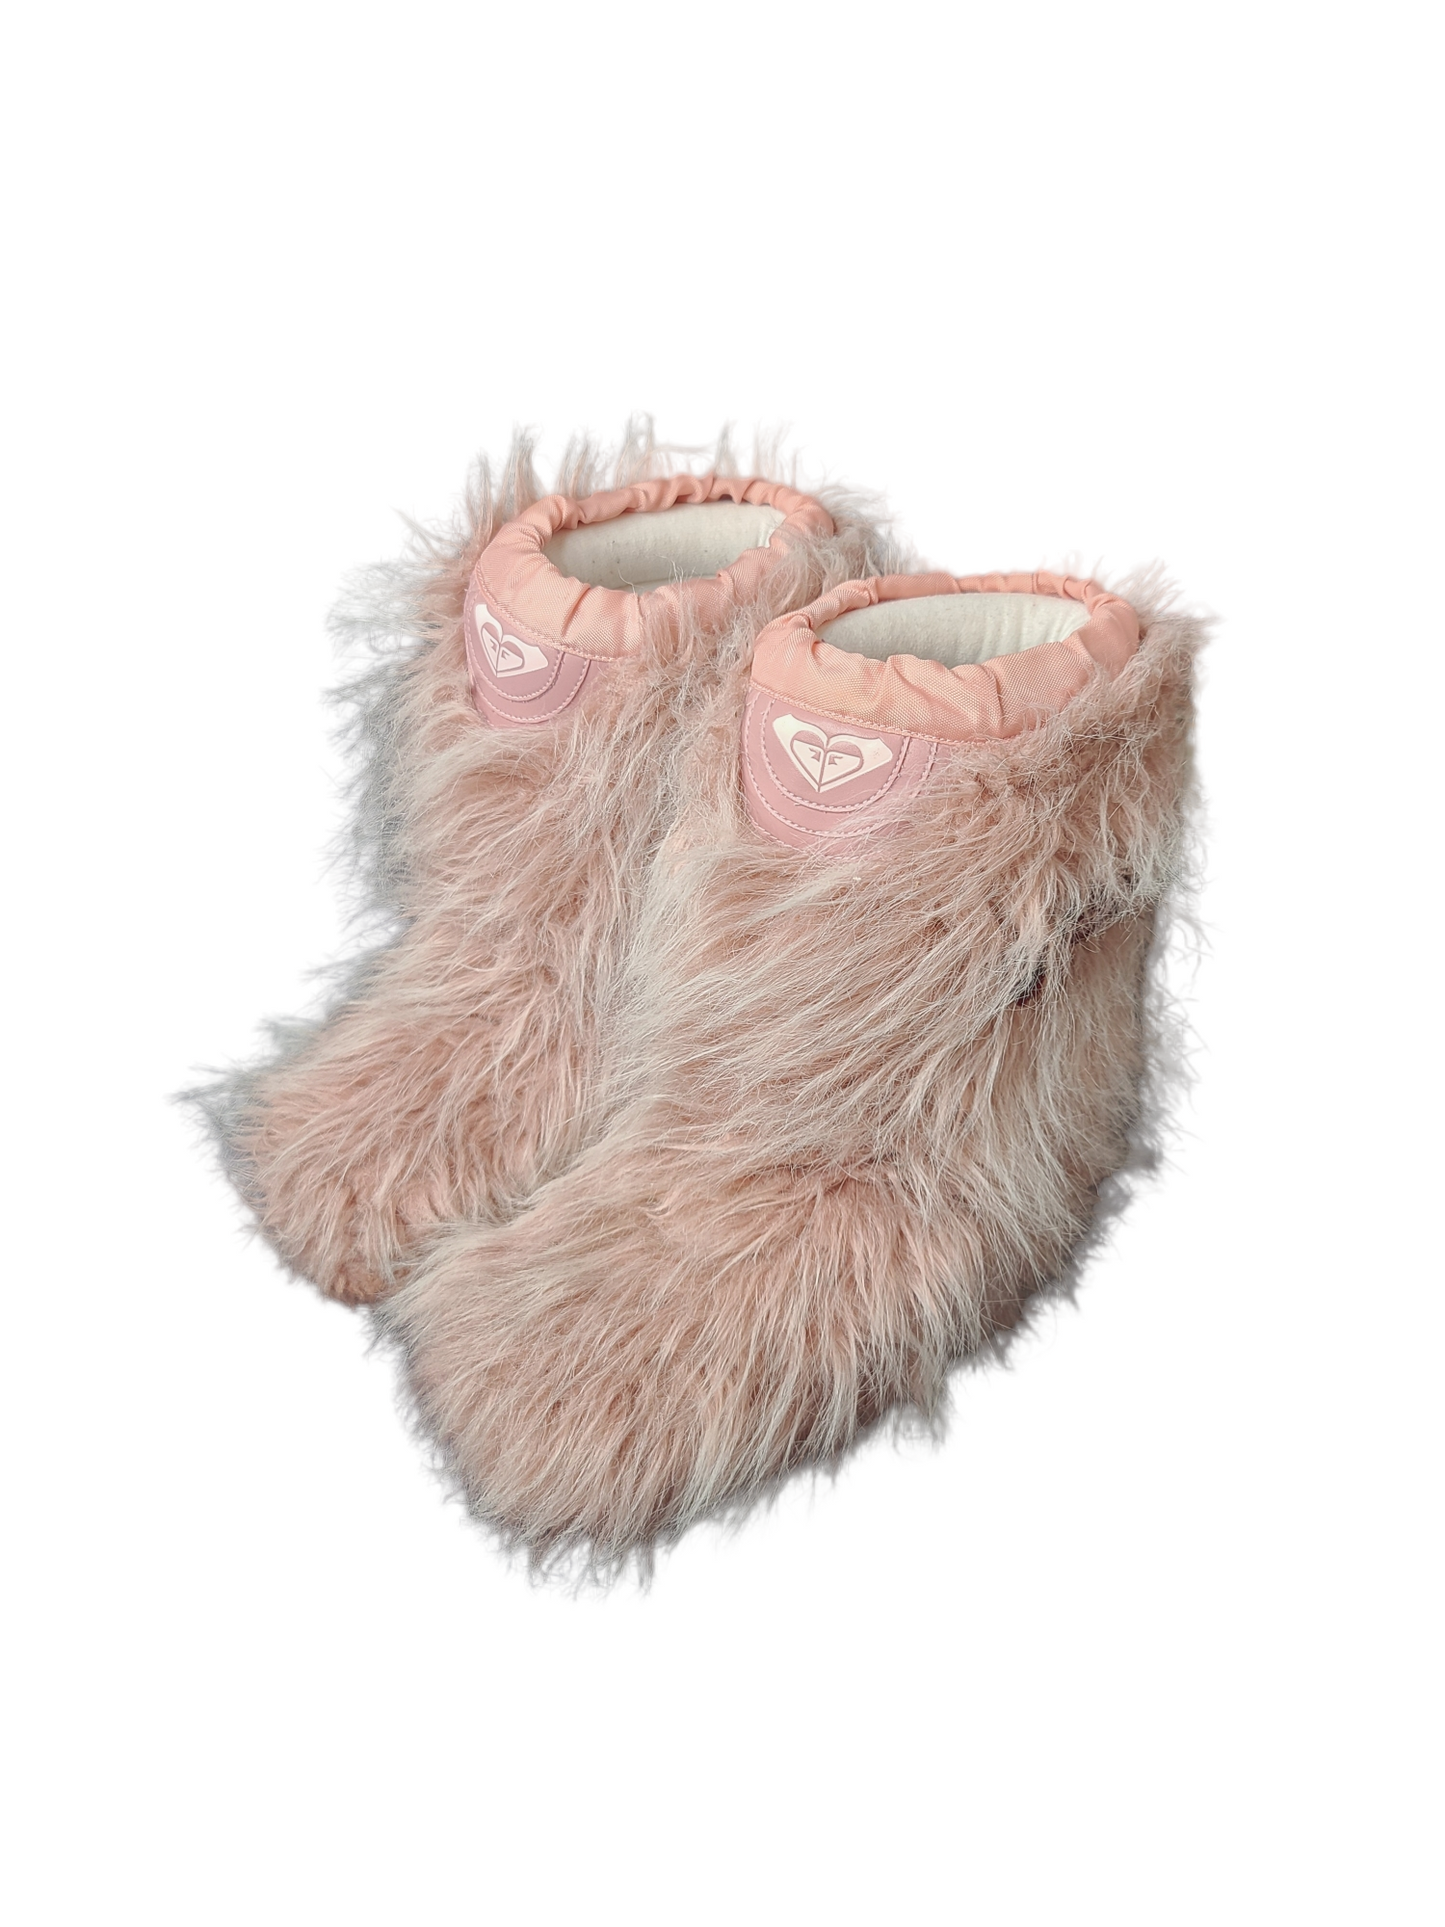 Roxy yeti boots 90s fluffy strawberry milk vintage collector cyber rave